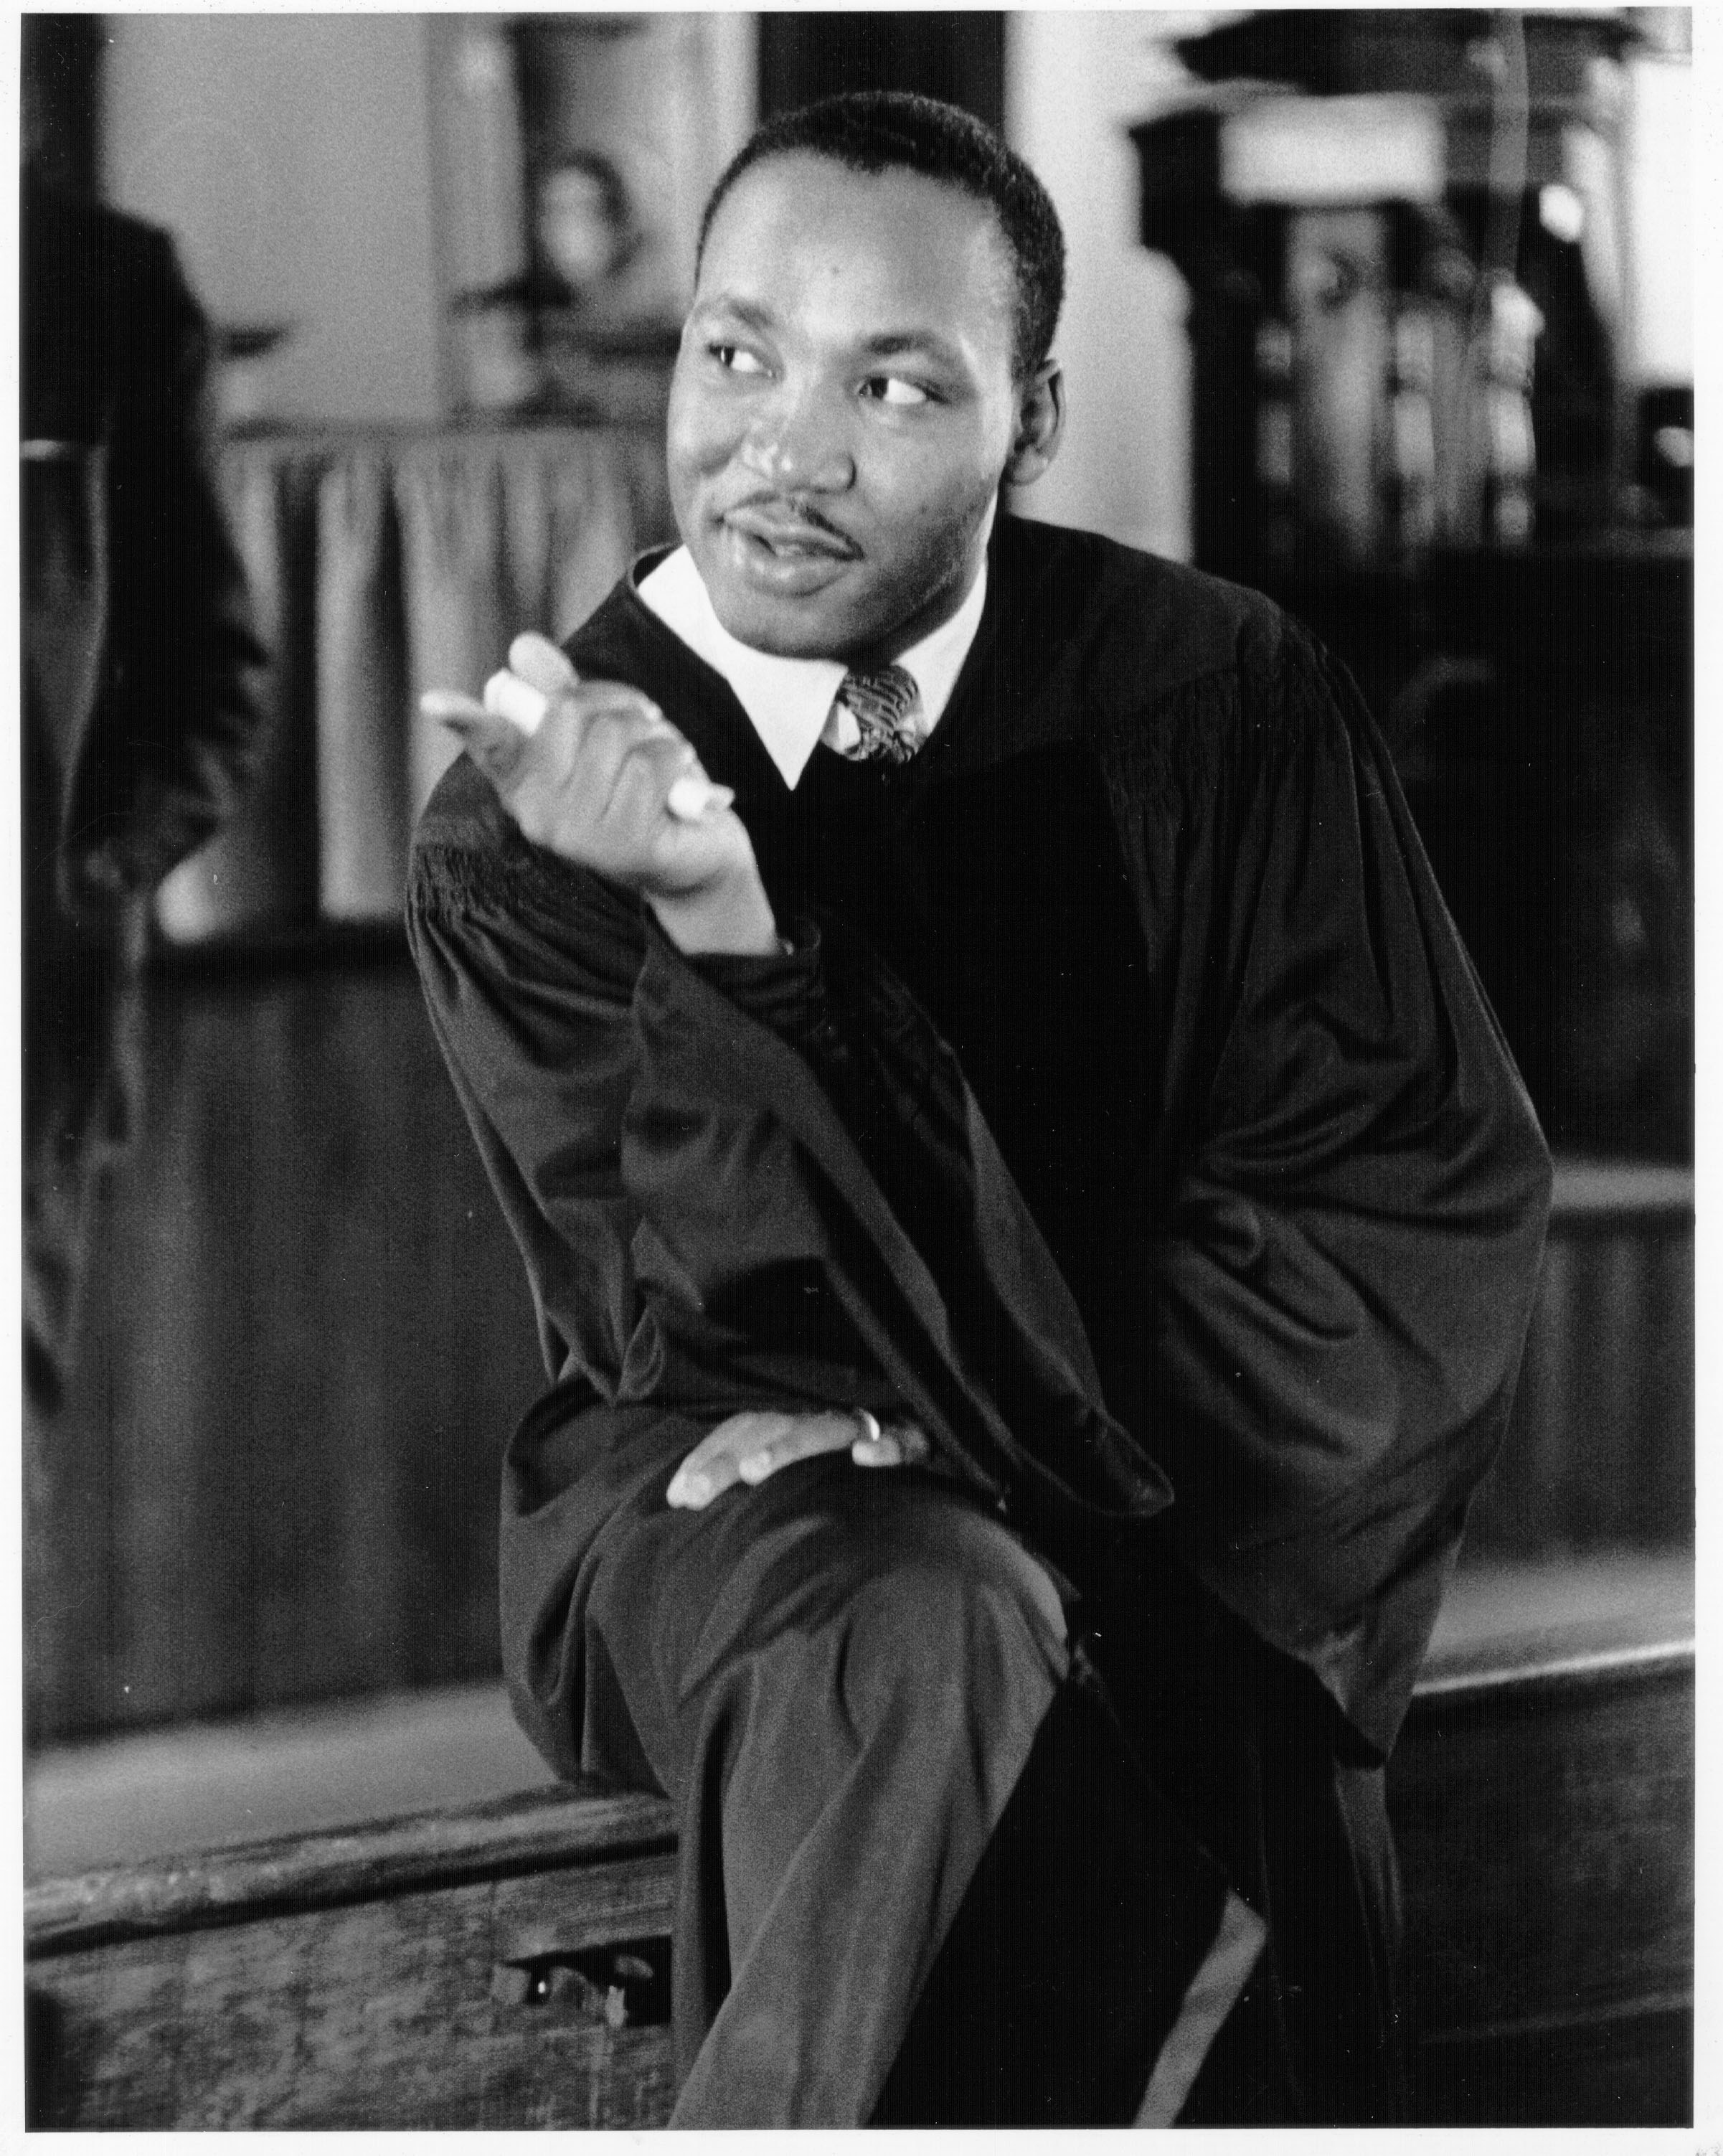 Dr. King speaking and pointing